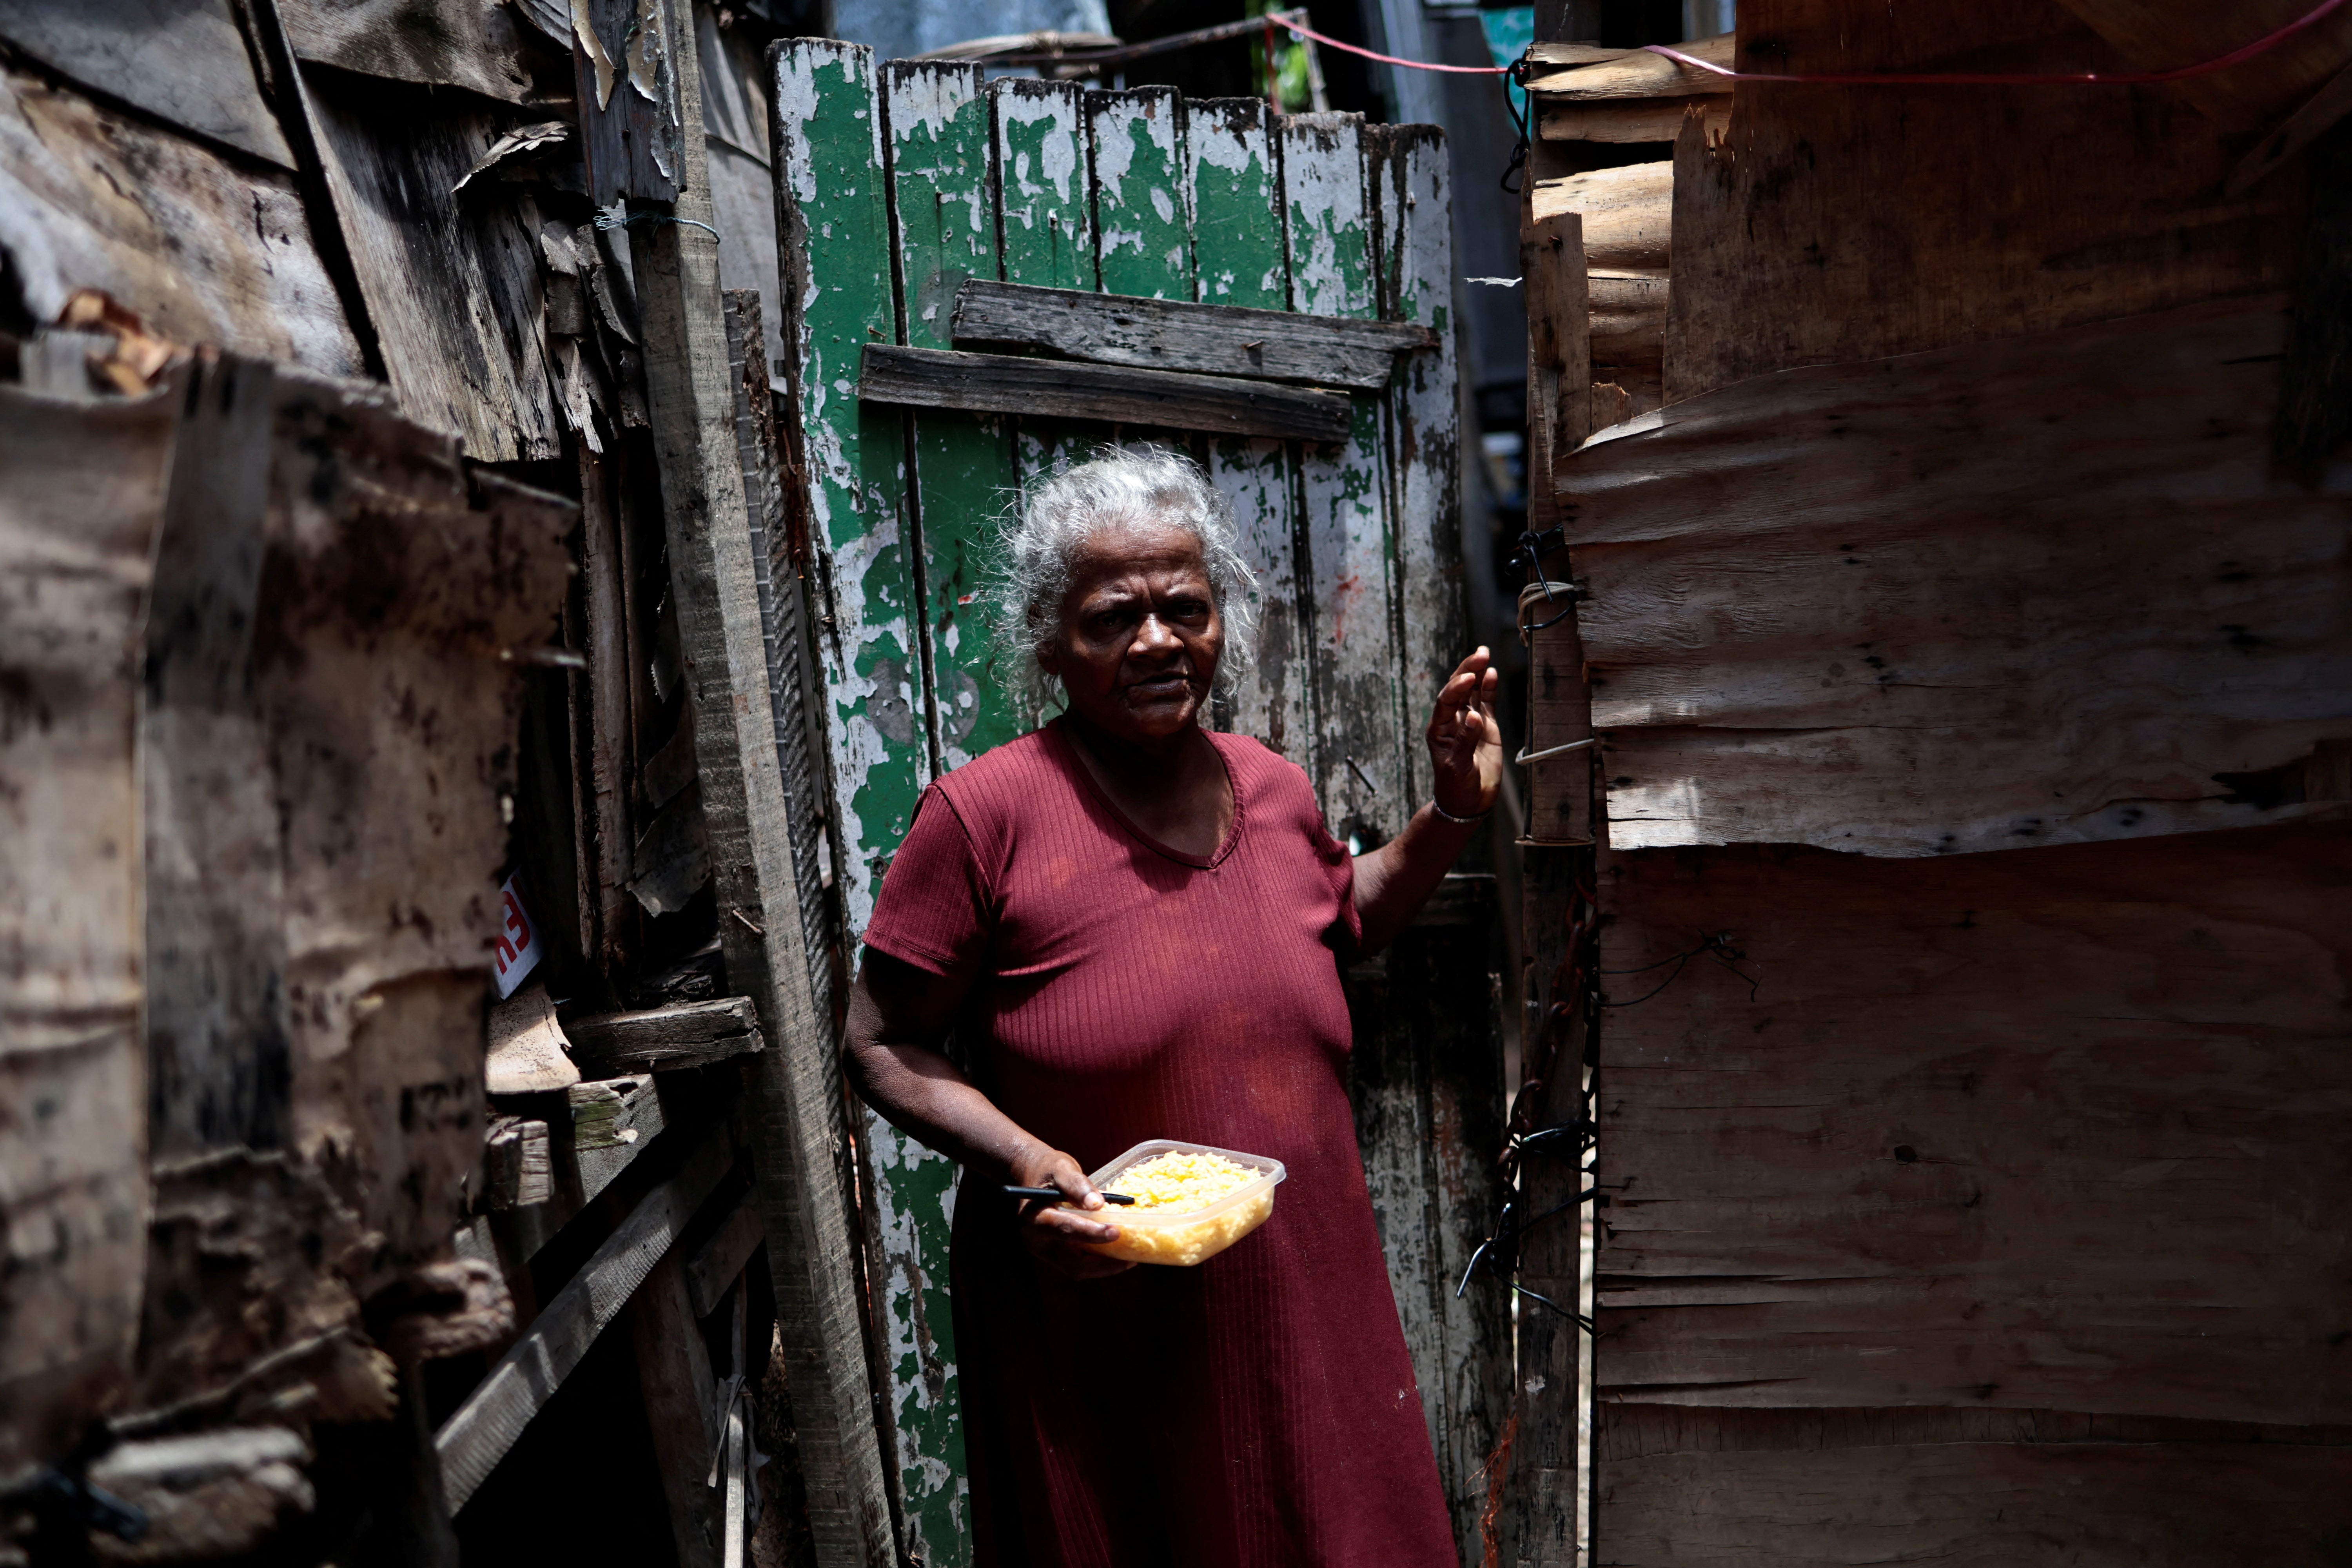 Maria Jose holds her lunch, a bowl of rice, in front of her house in the Arco Iris favela